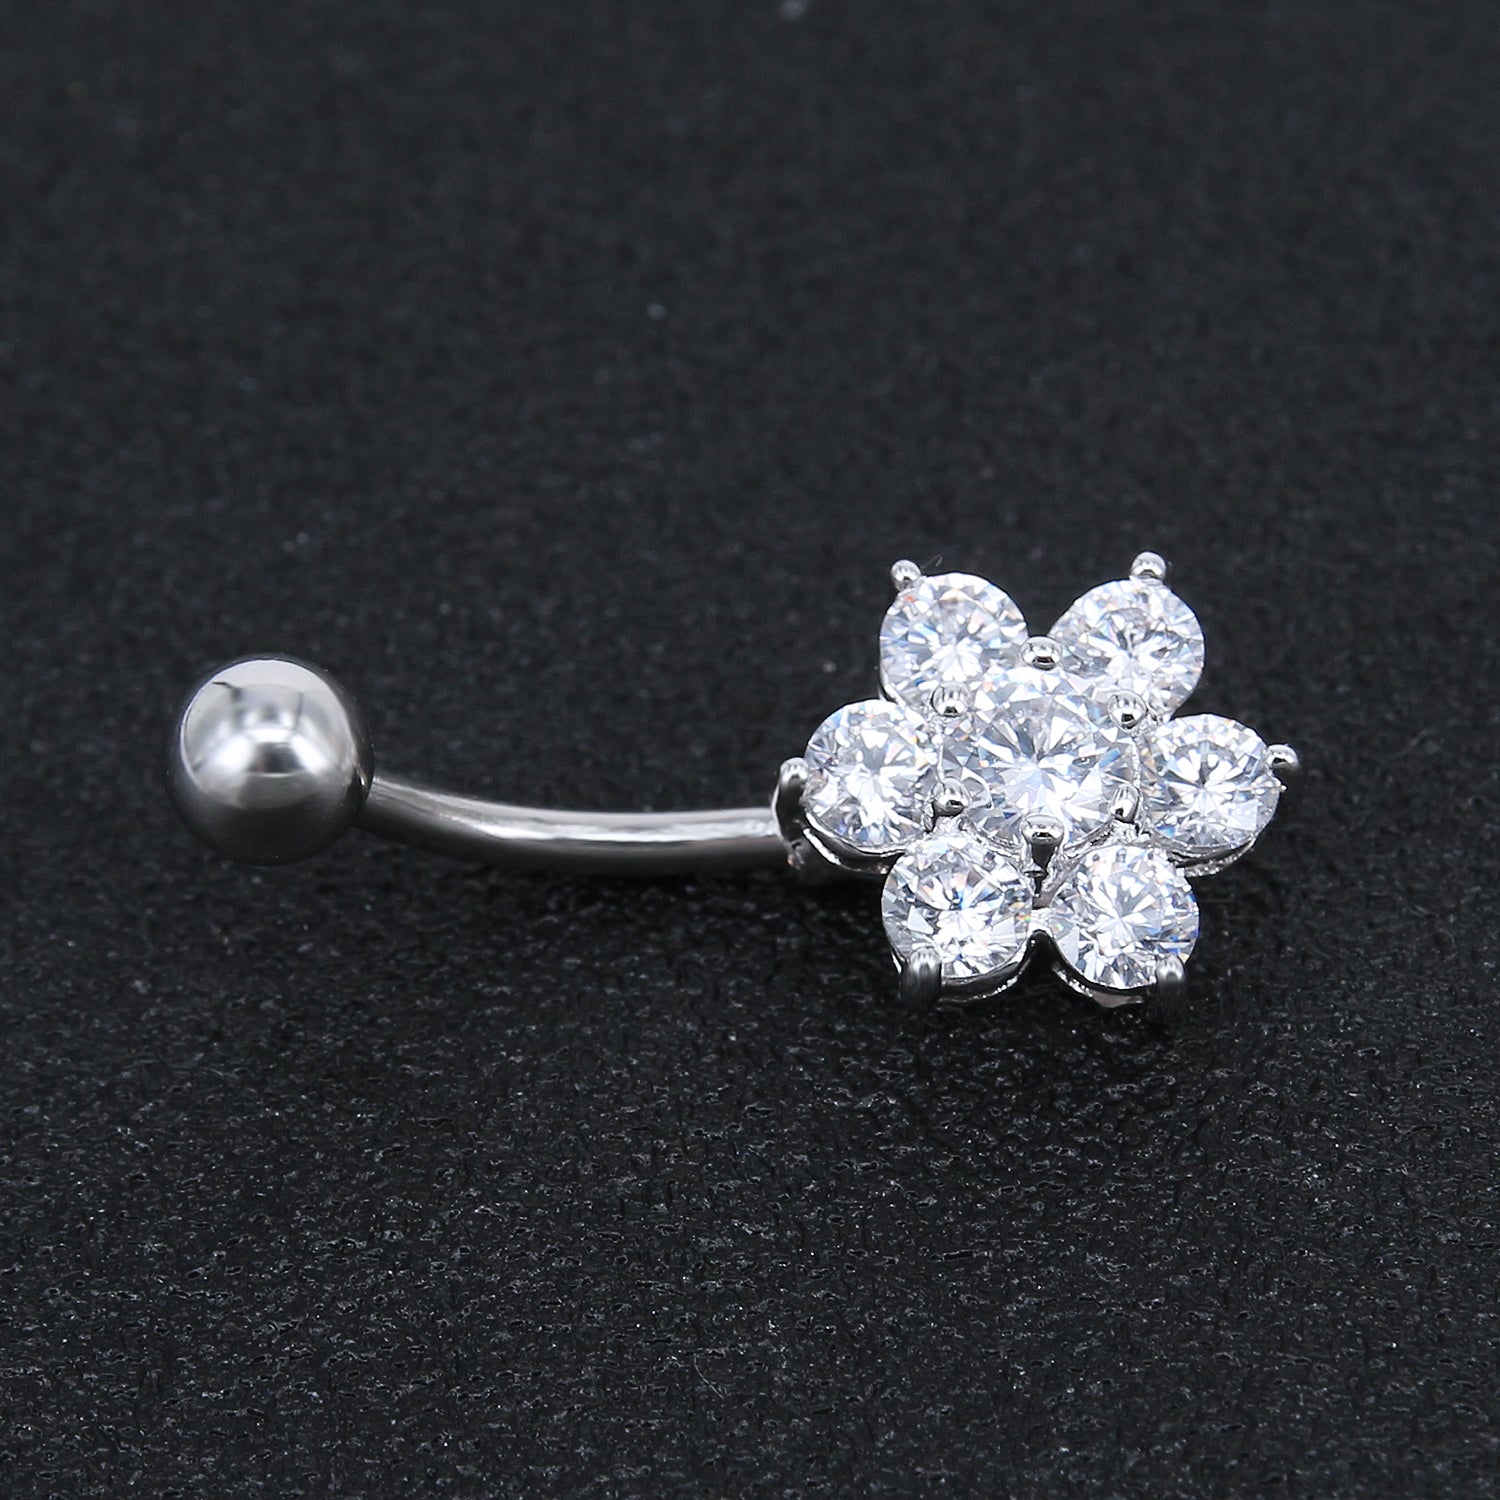 14g-Flower-Stainless-Steel-Belly-Button-Rings-Cubic-Zirconia-Belly-Rings-Piercing-Jewelry